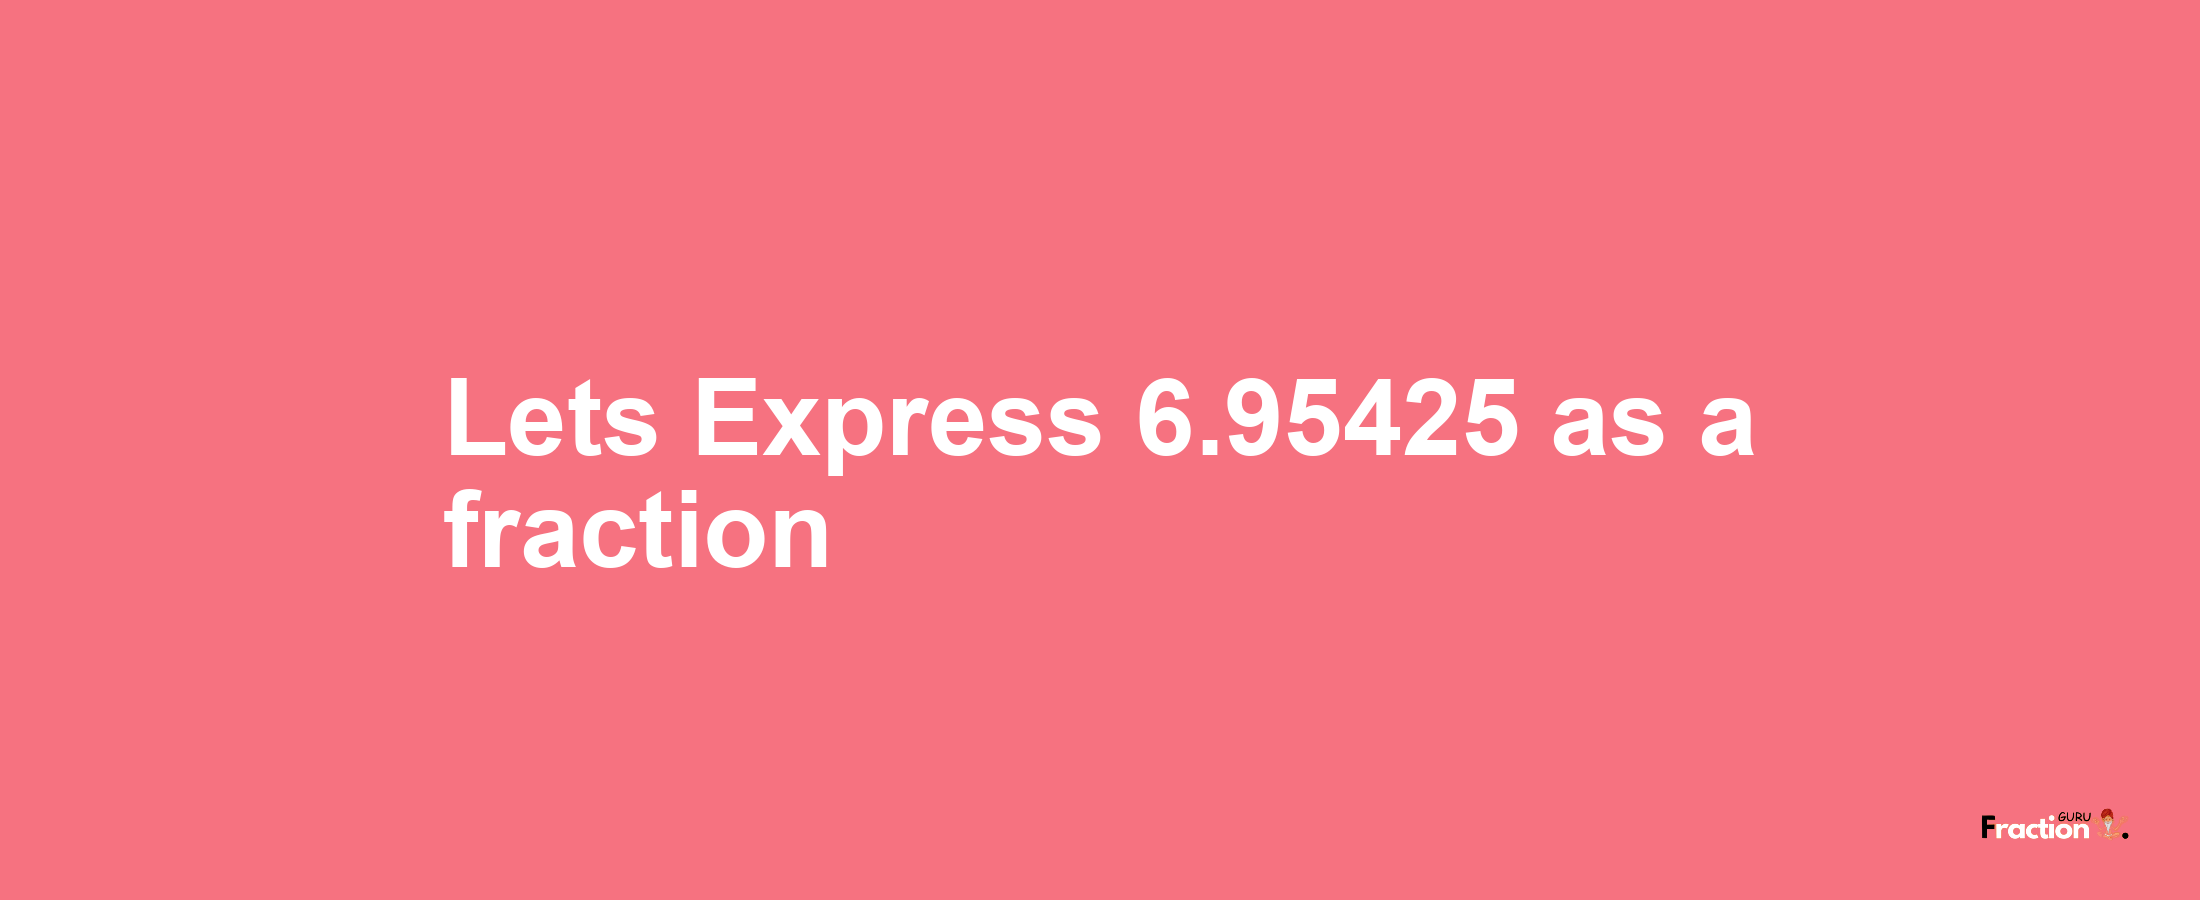 Lets Express 6.95425 as afraction